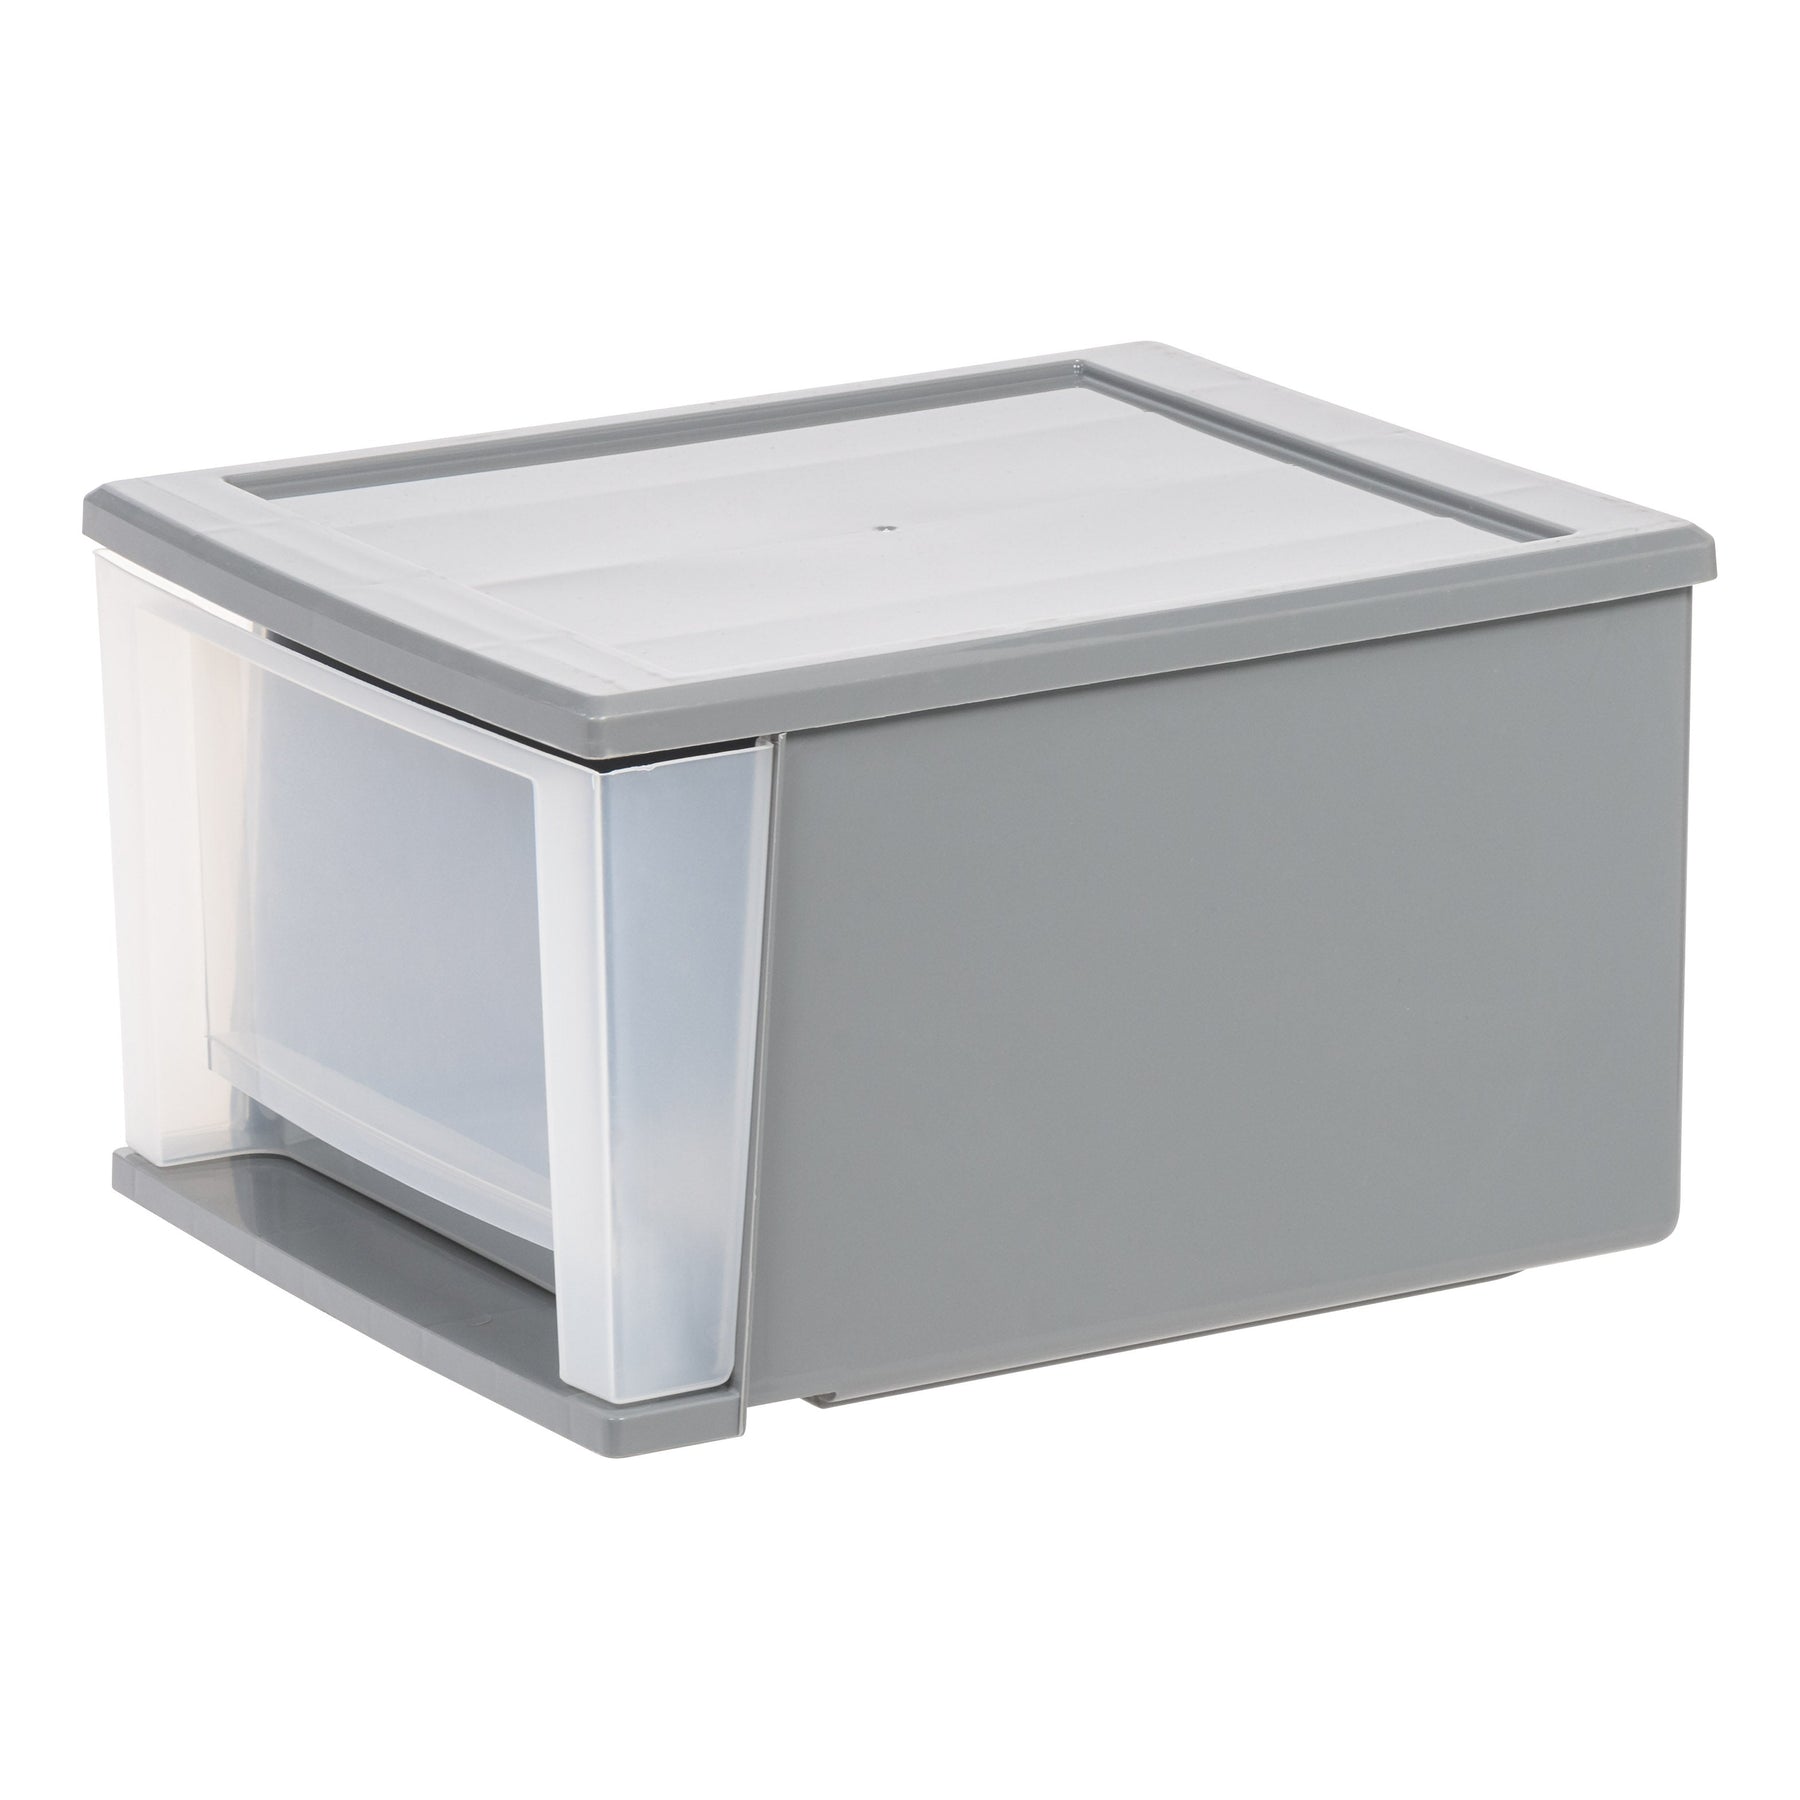 Iris USA, Inc. 12 W Stackable Storage Drawer, Pack of 3